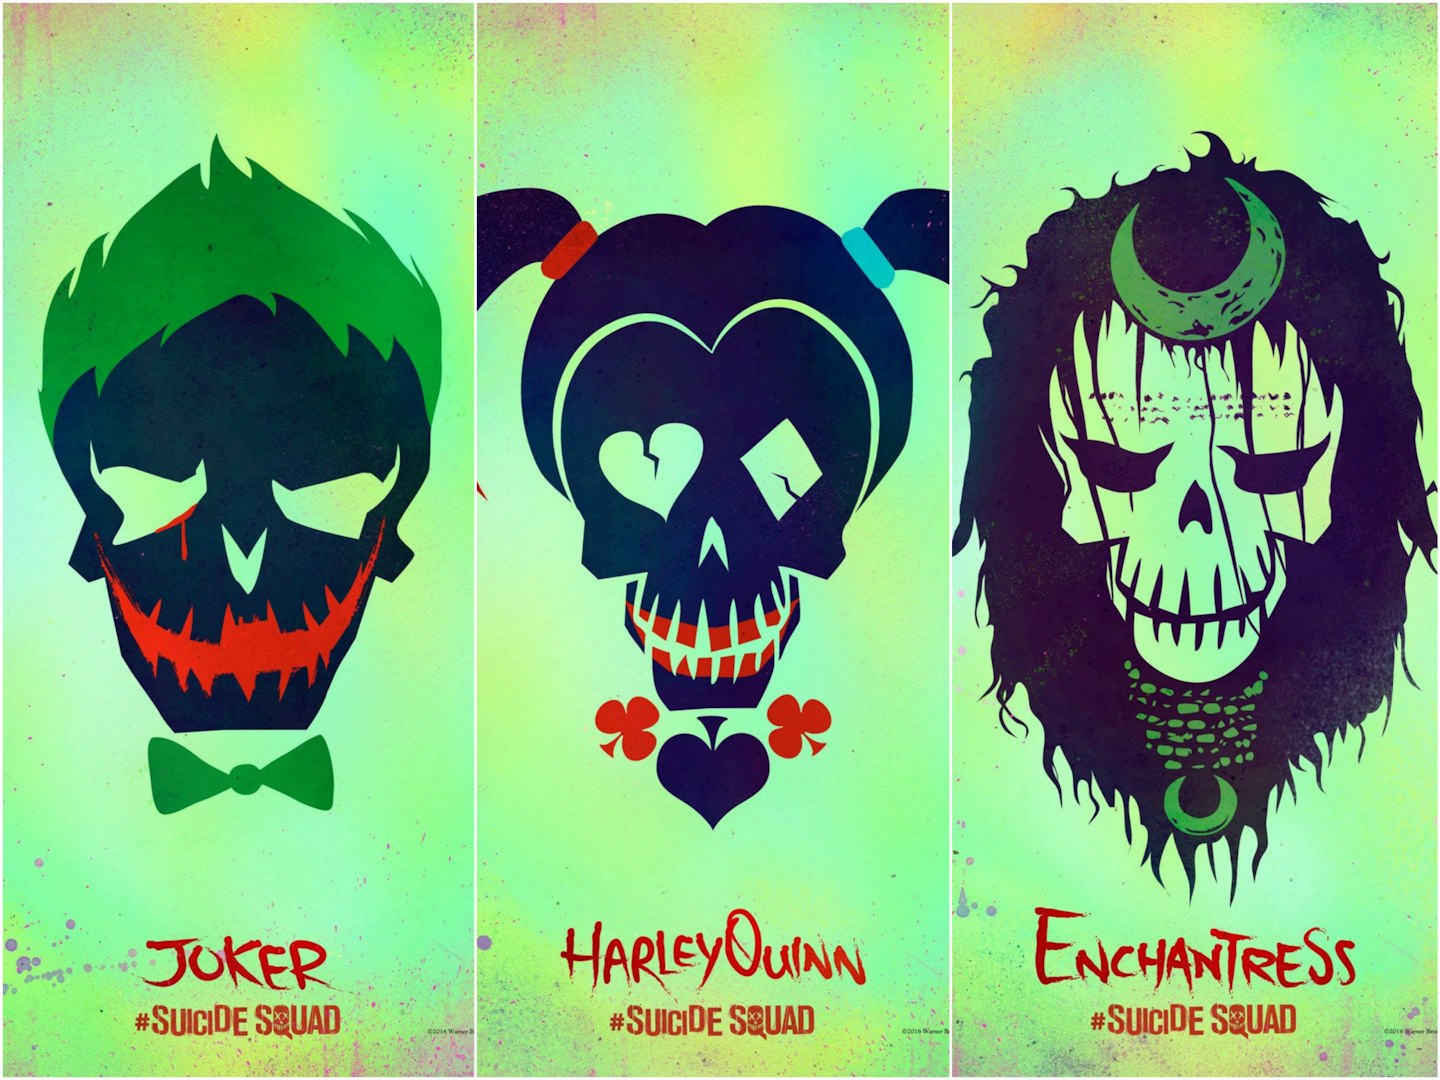 Suicide Squad character posters 2